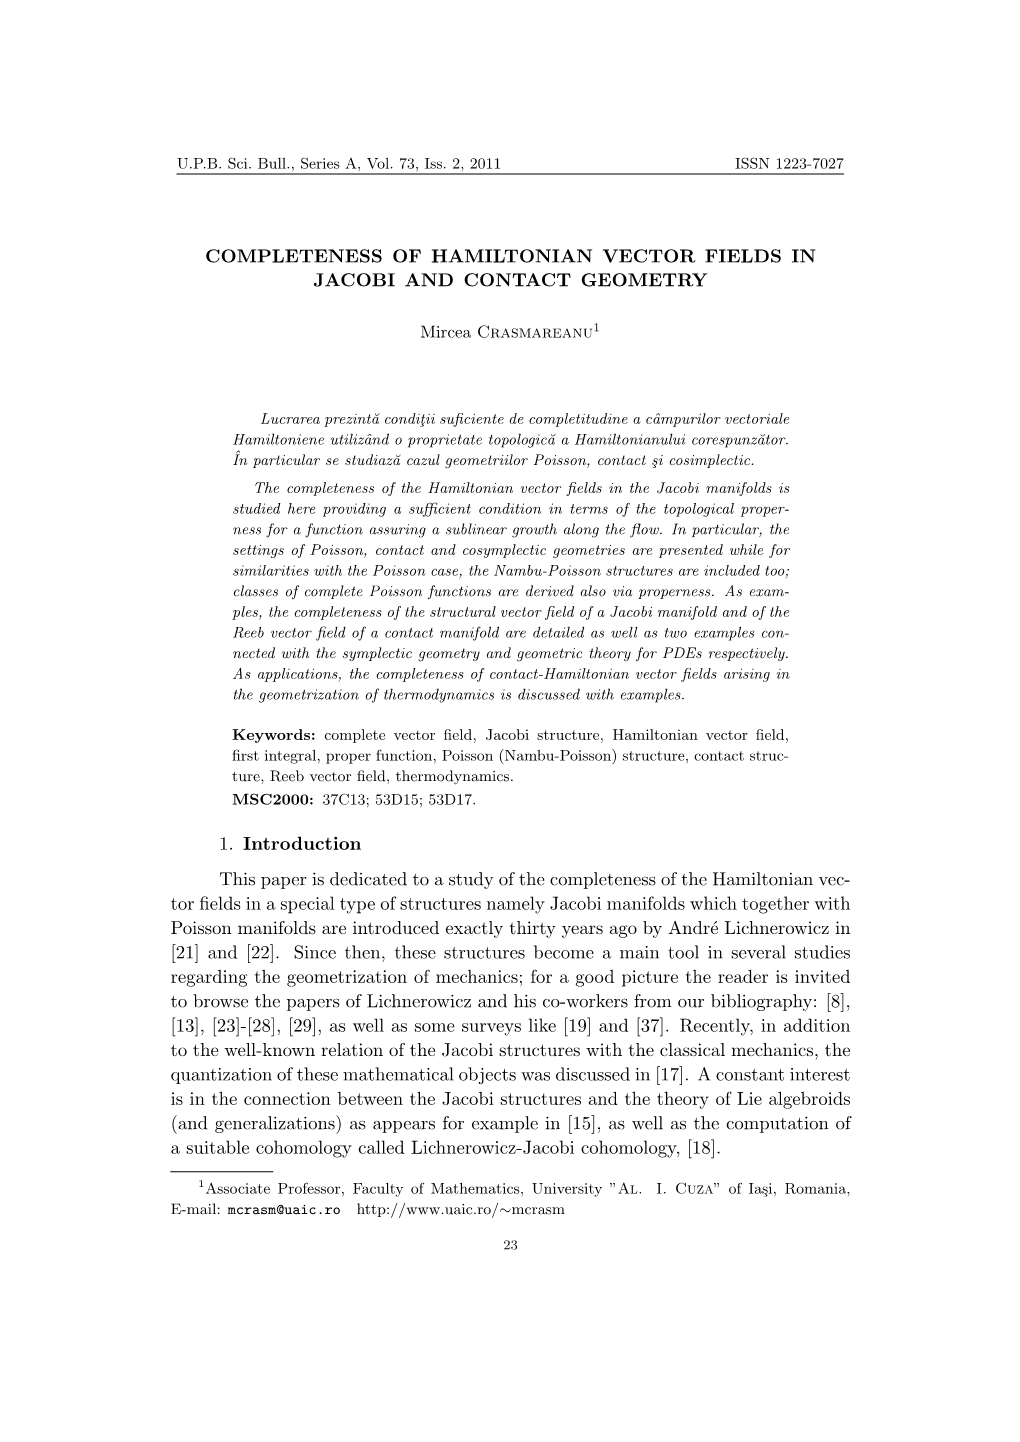 Completeness of Hamiltonian Vector Fields in Jacobi and Contact Geometry